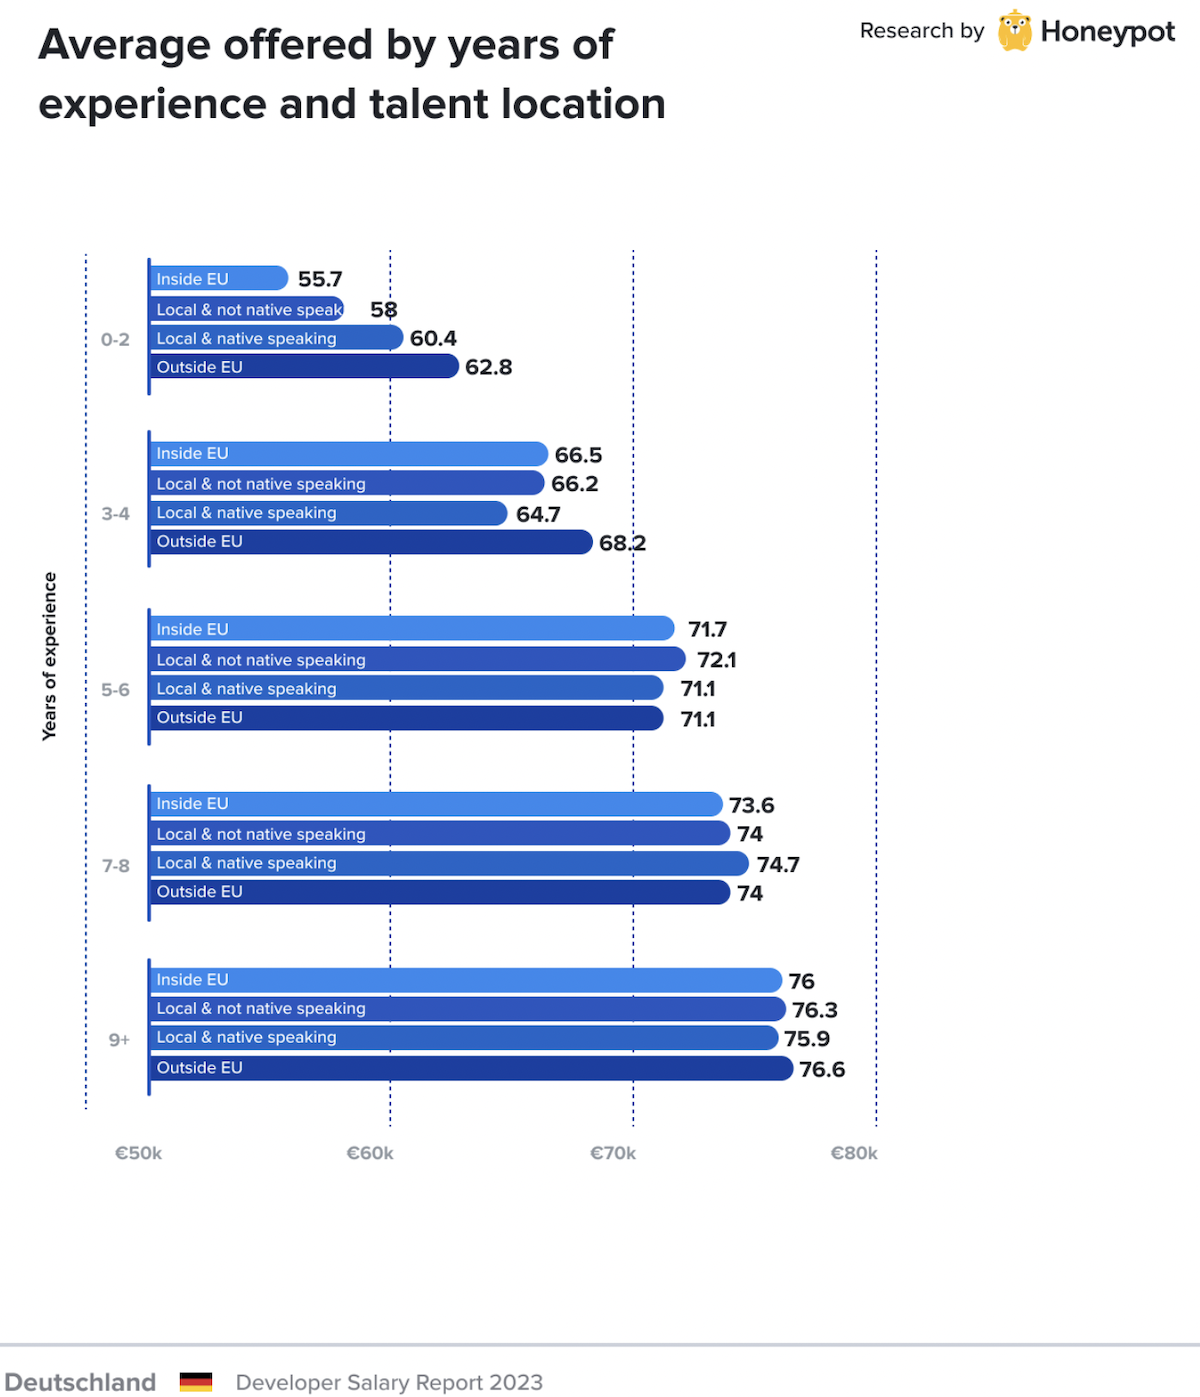 Germany – Average offered by years of exbyience and talent location